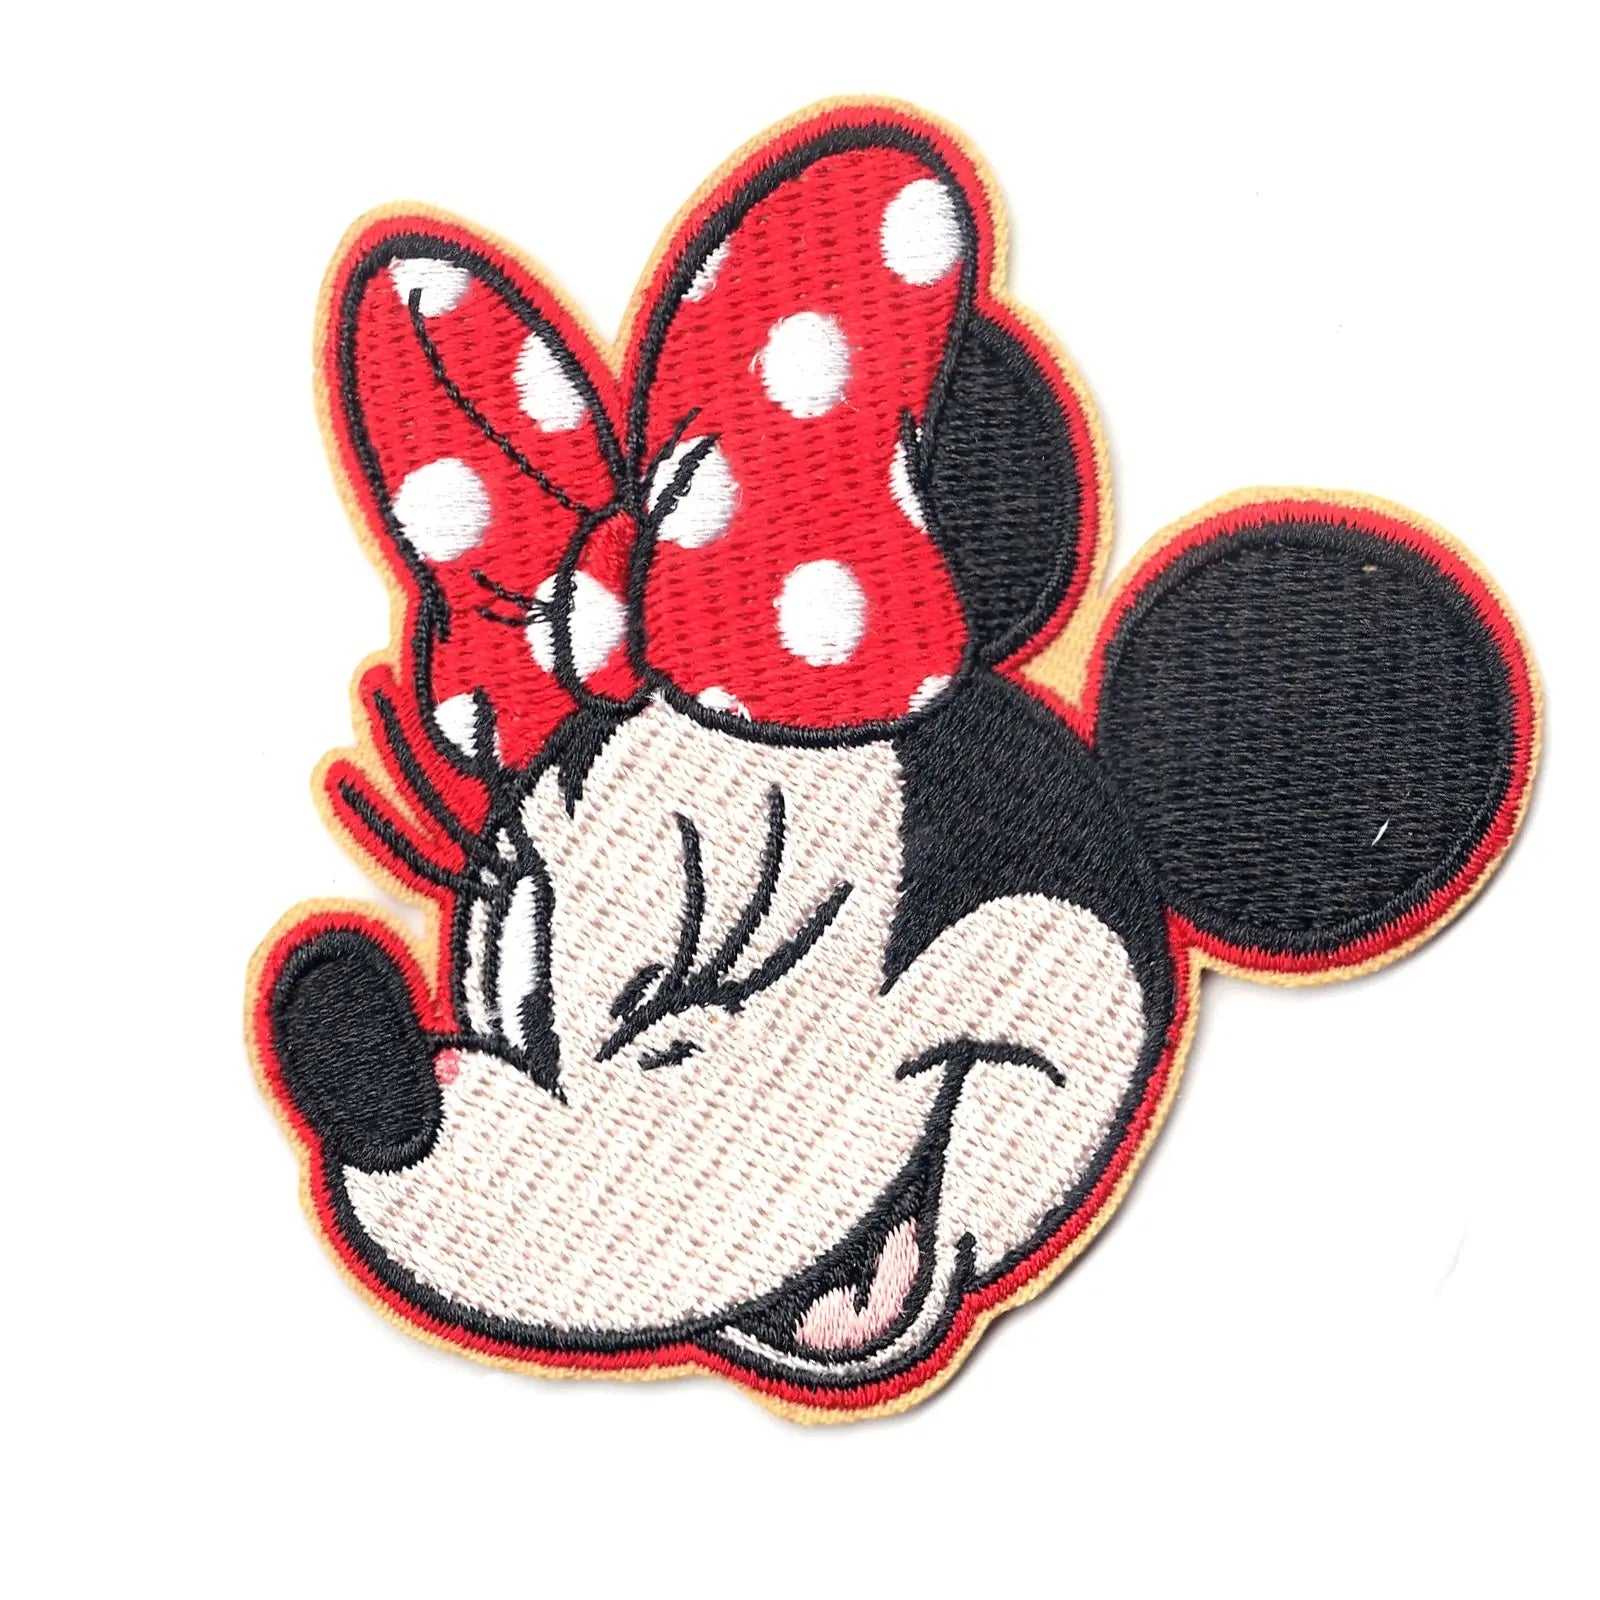 Disney, Other, Disney Iron On Patches Set Of 2 New